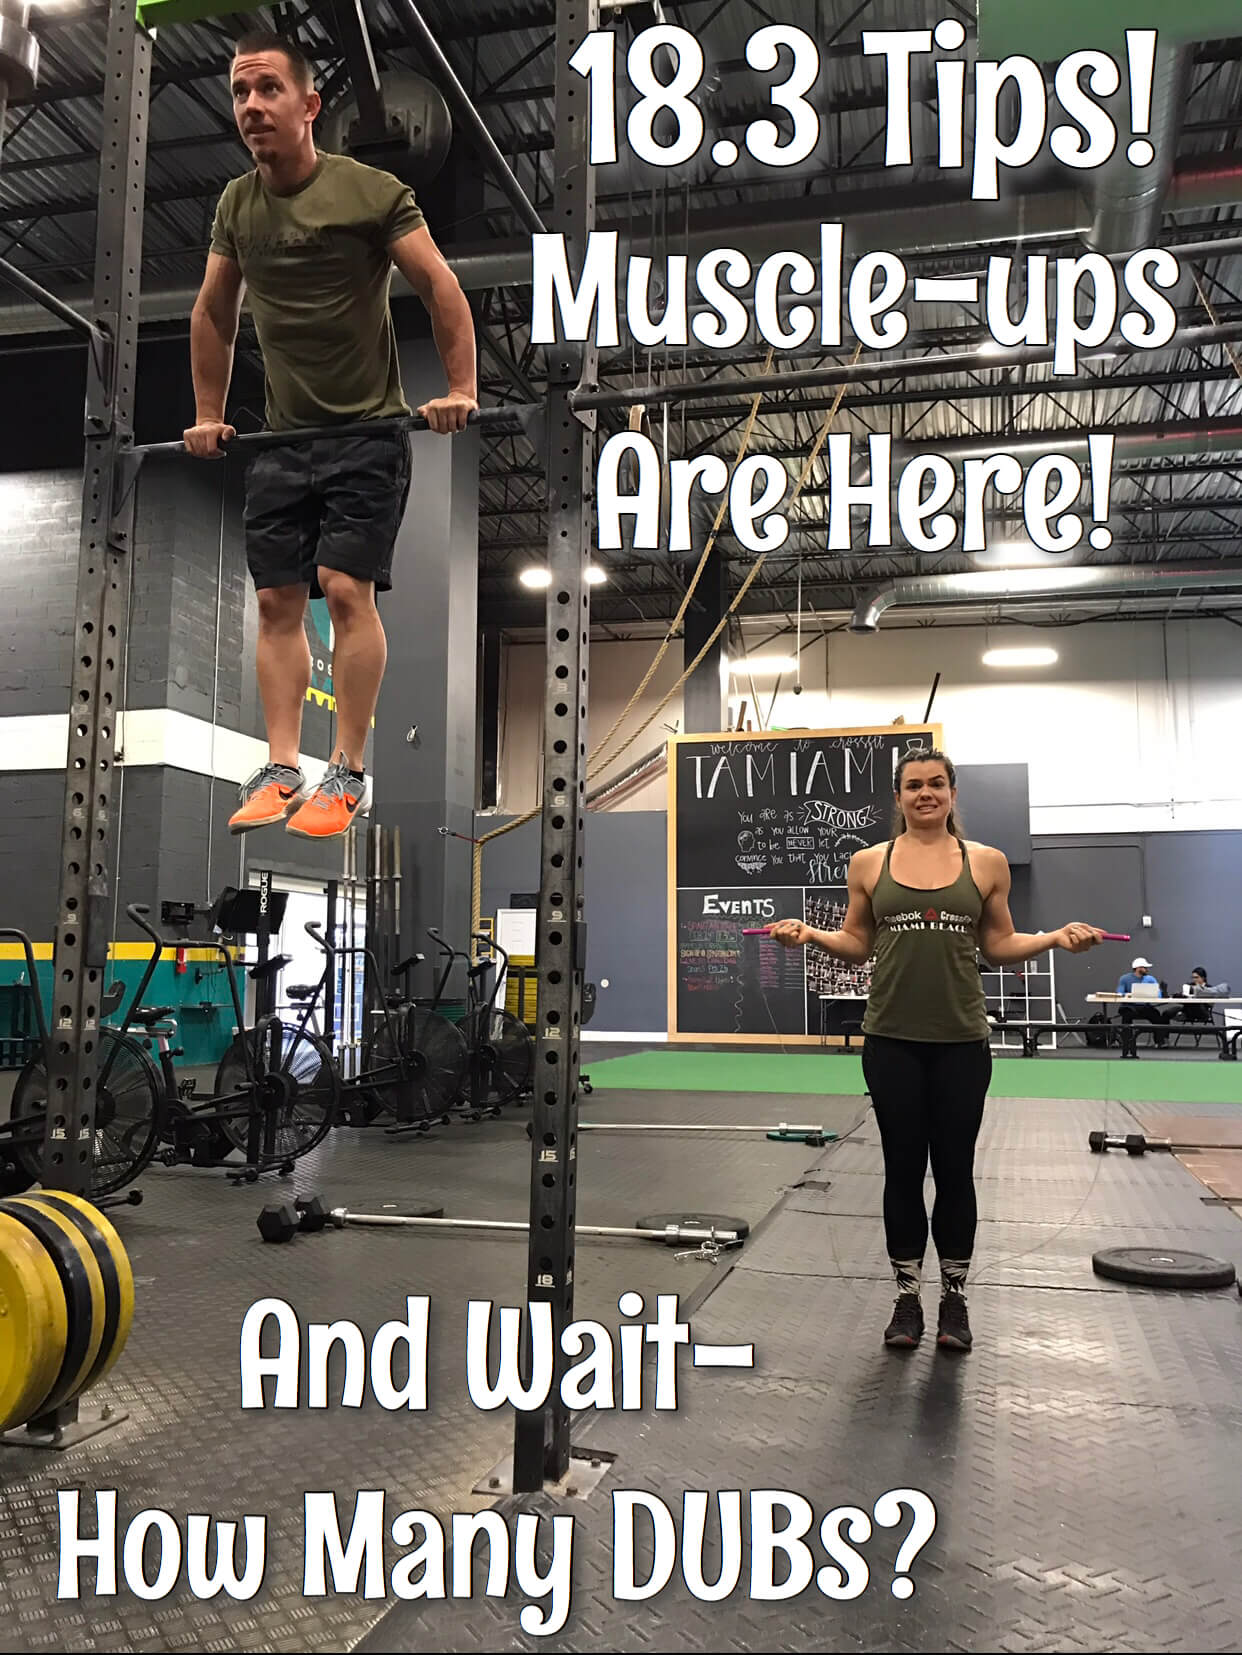 18.3 Tips! Muscle-ups Are Here. And Wait- That’s How Many DUBs?